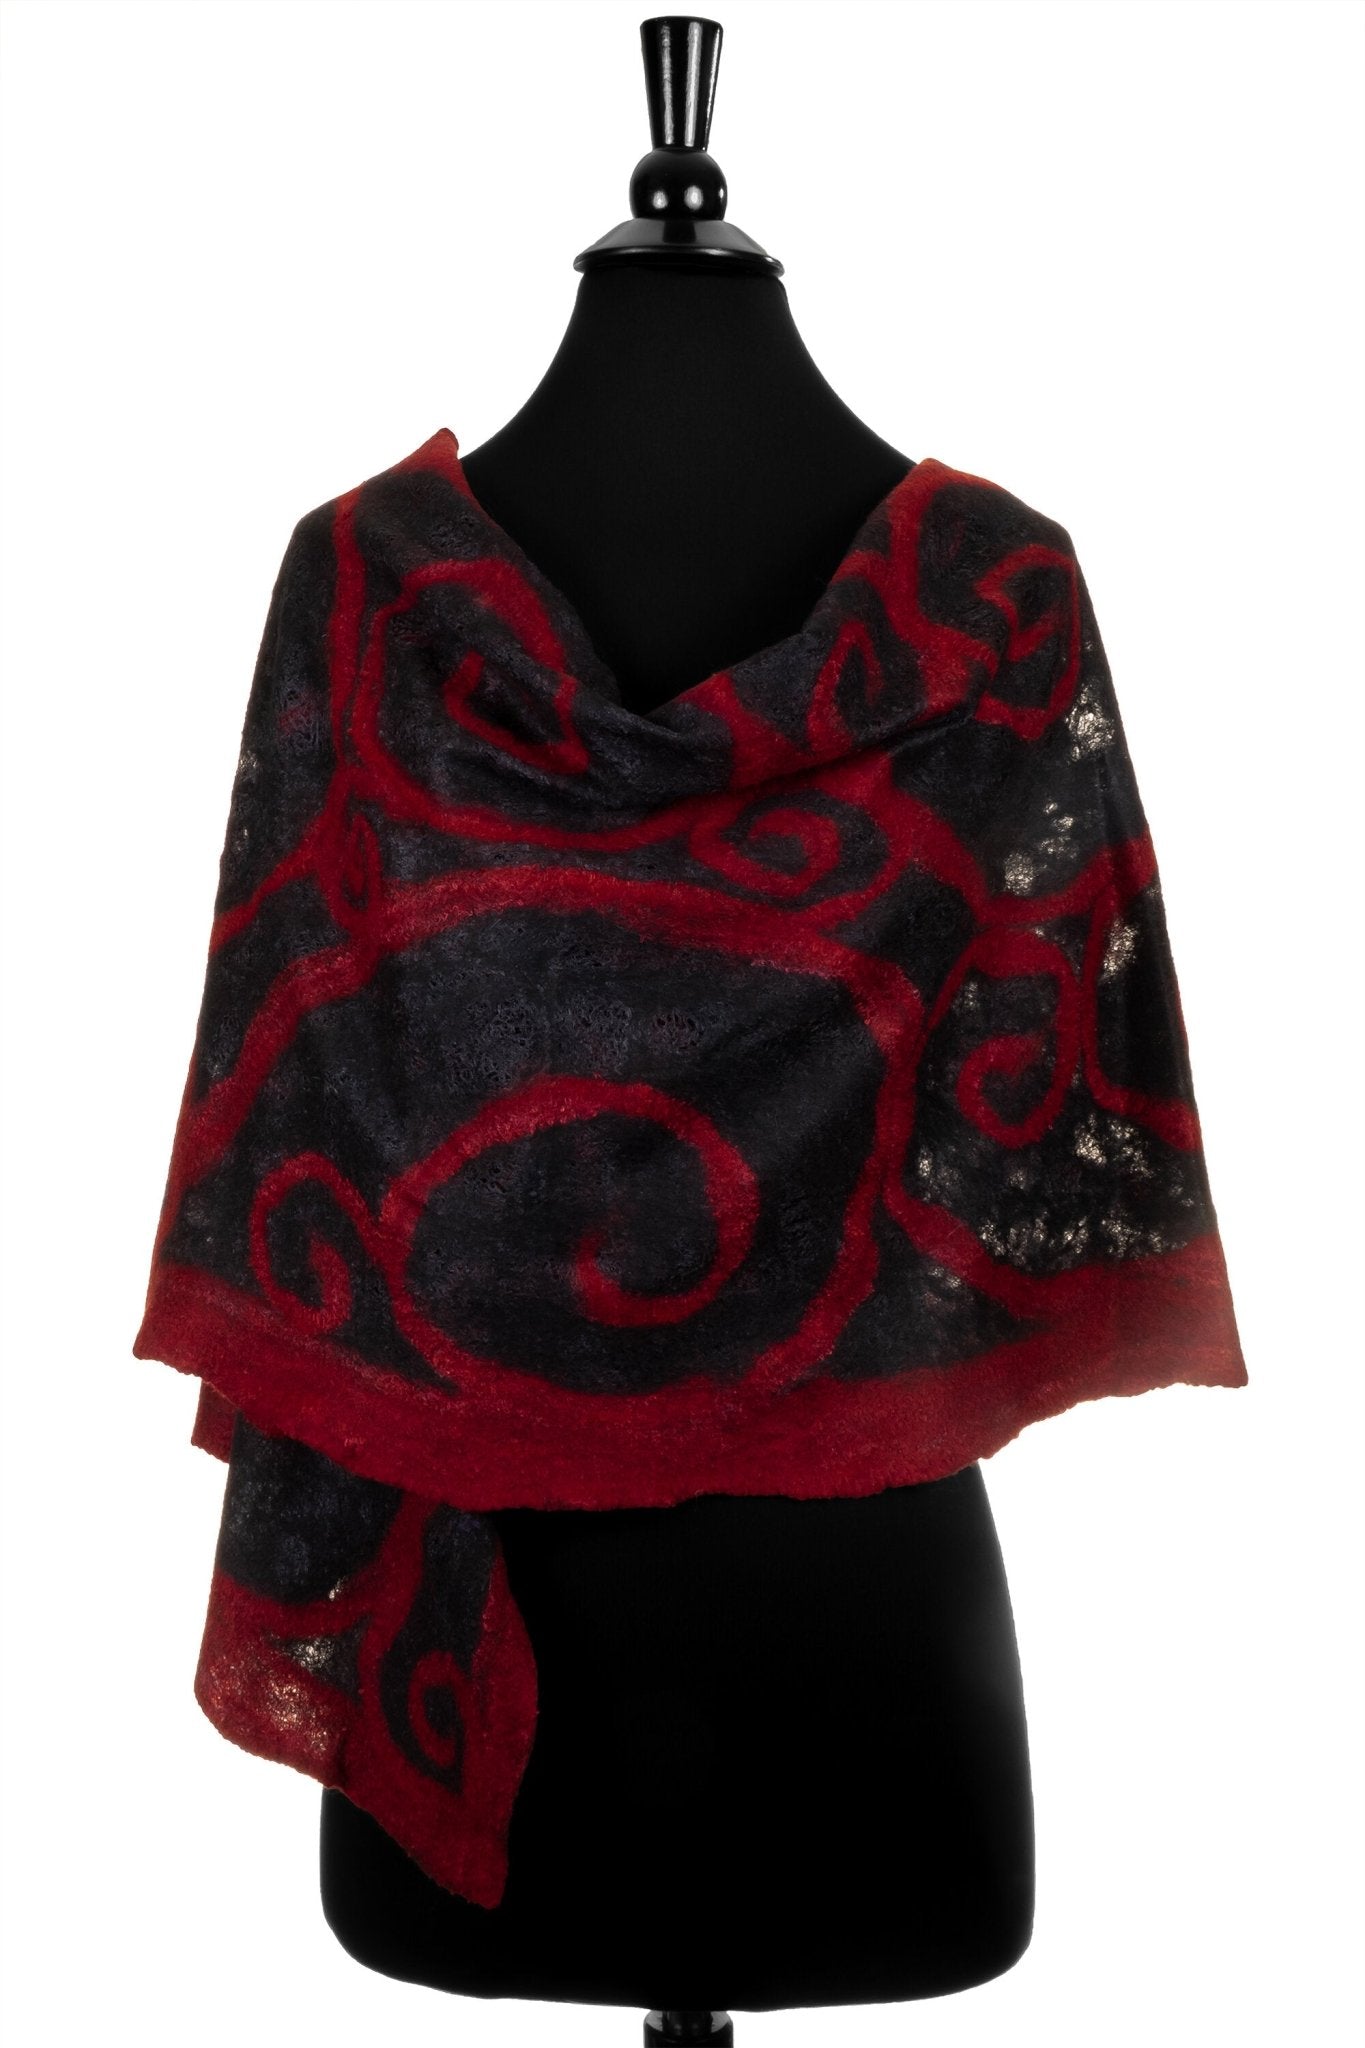 Felted Spiral Wrap in Red and Black - Sherri O Designs